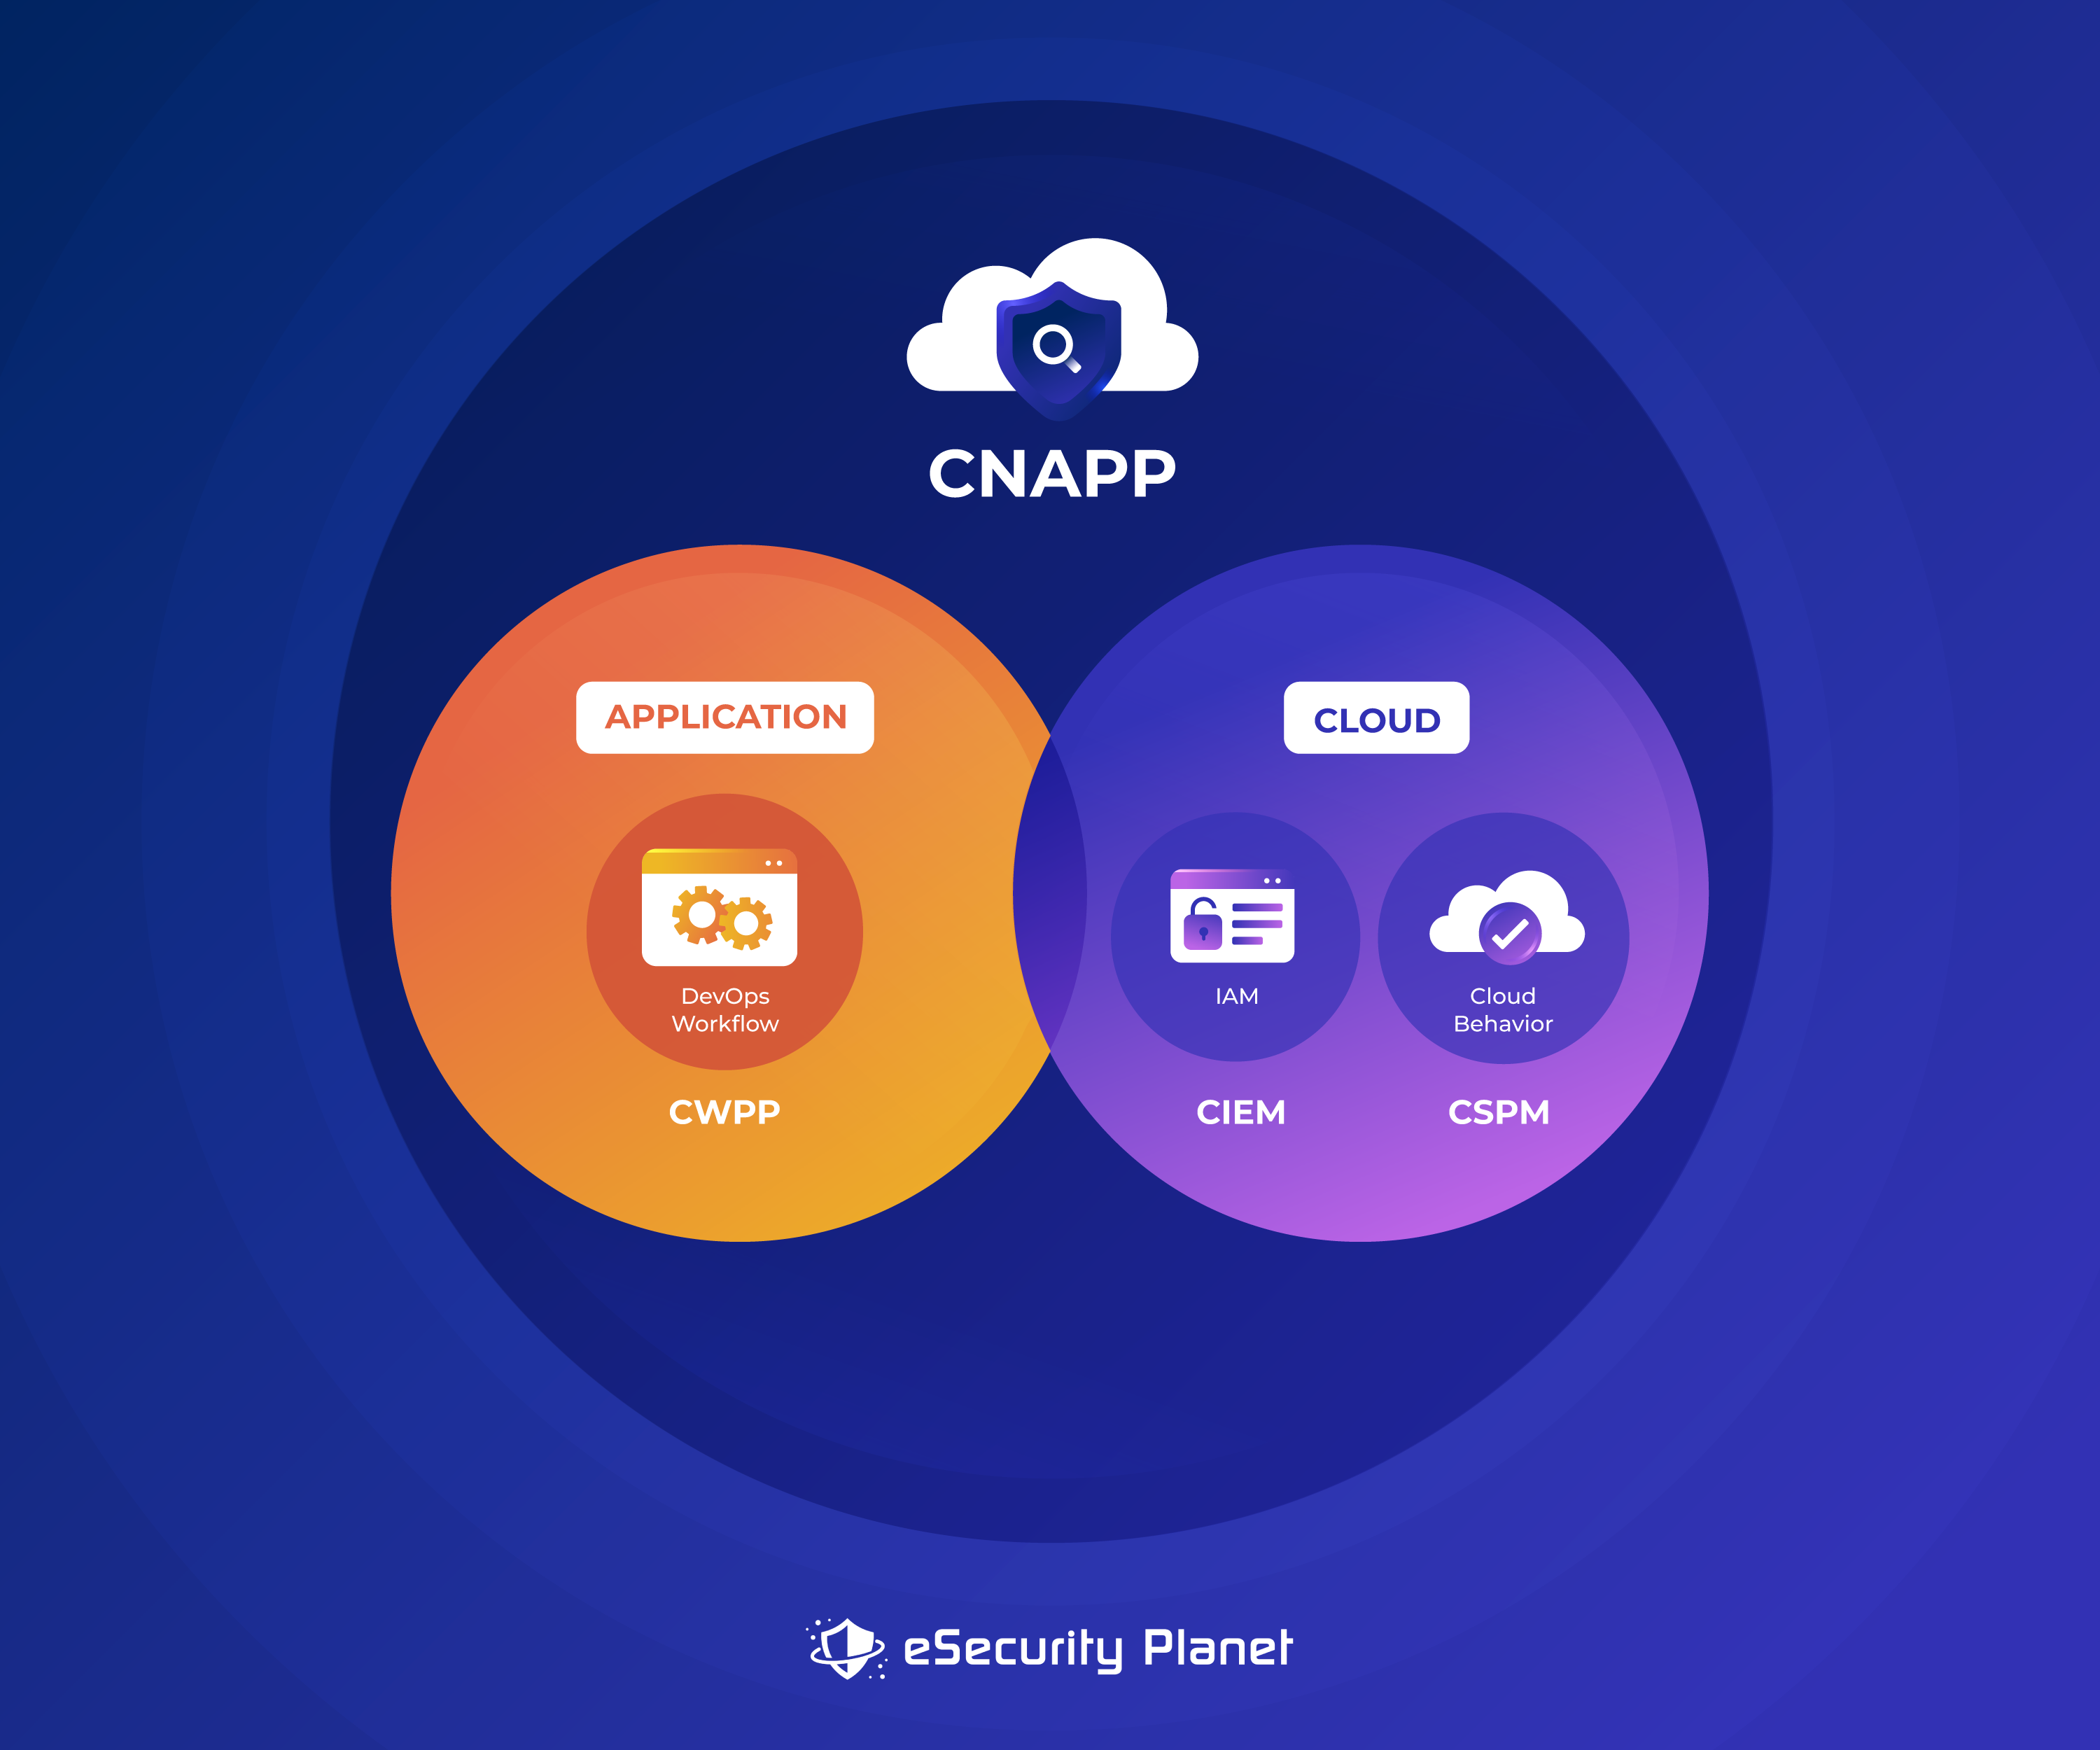 CNAPP infographic by eSecurity Planet.